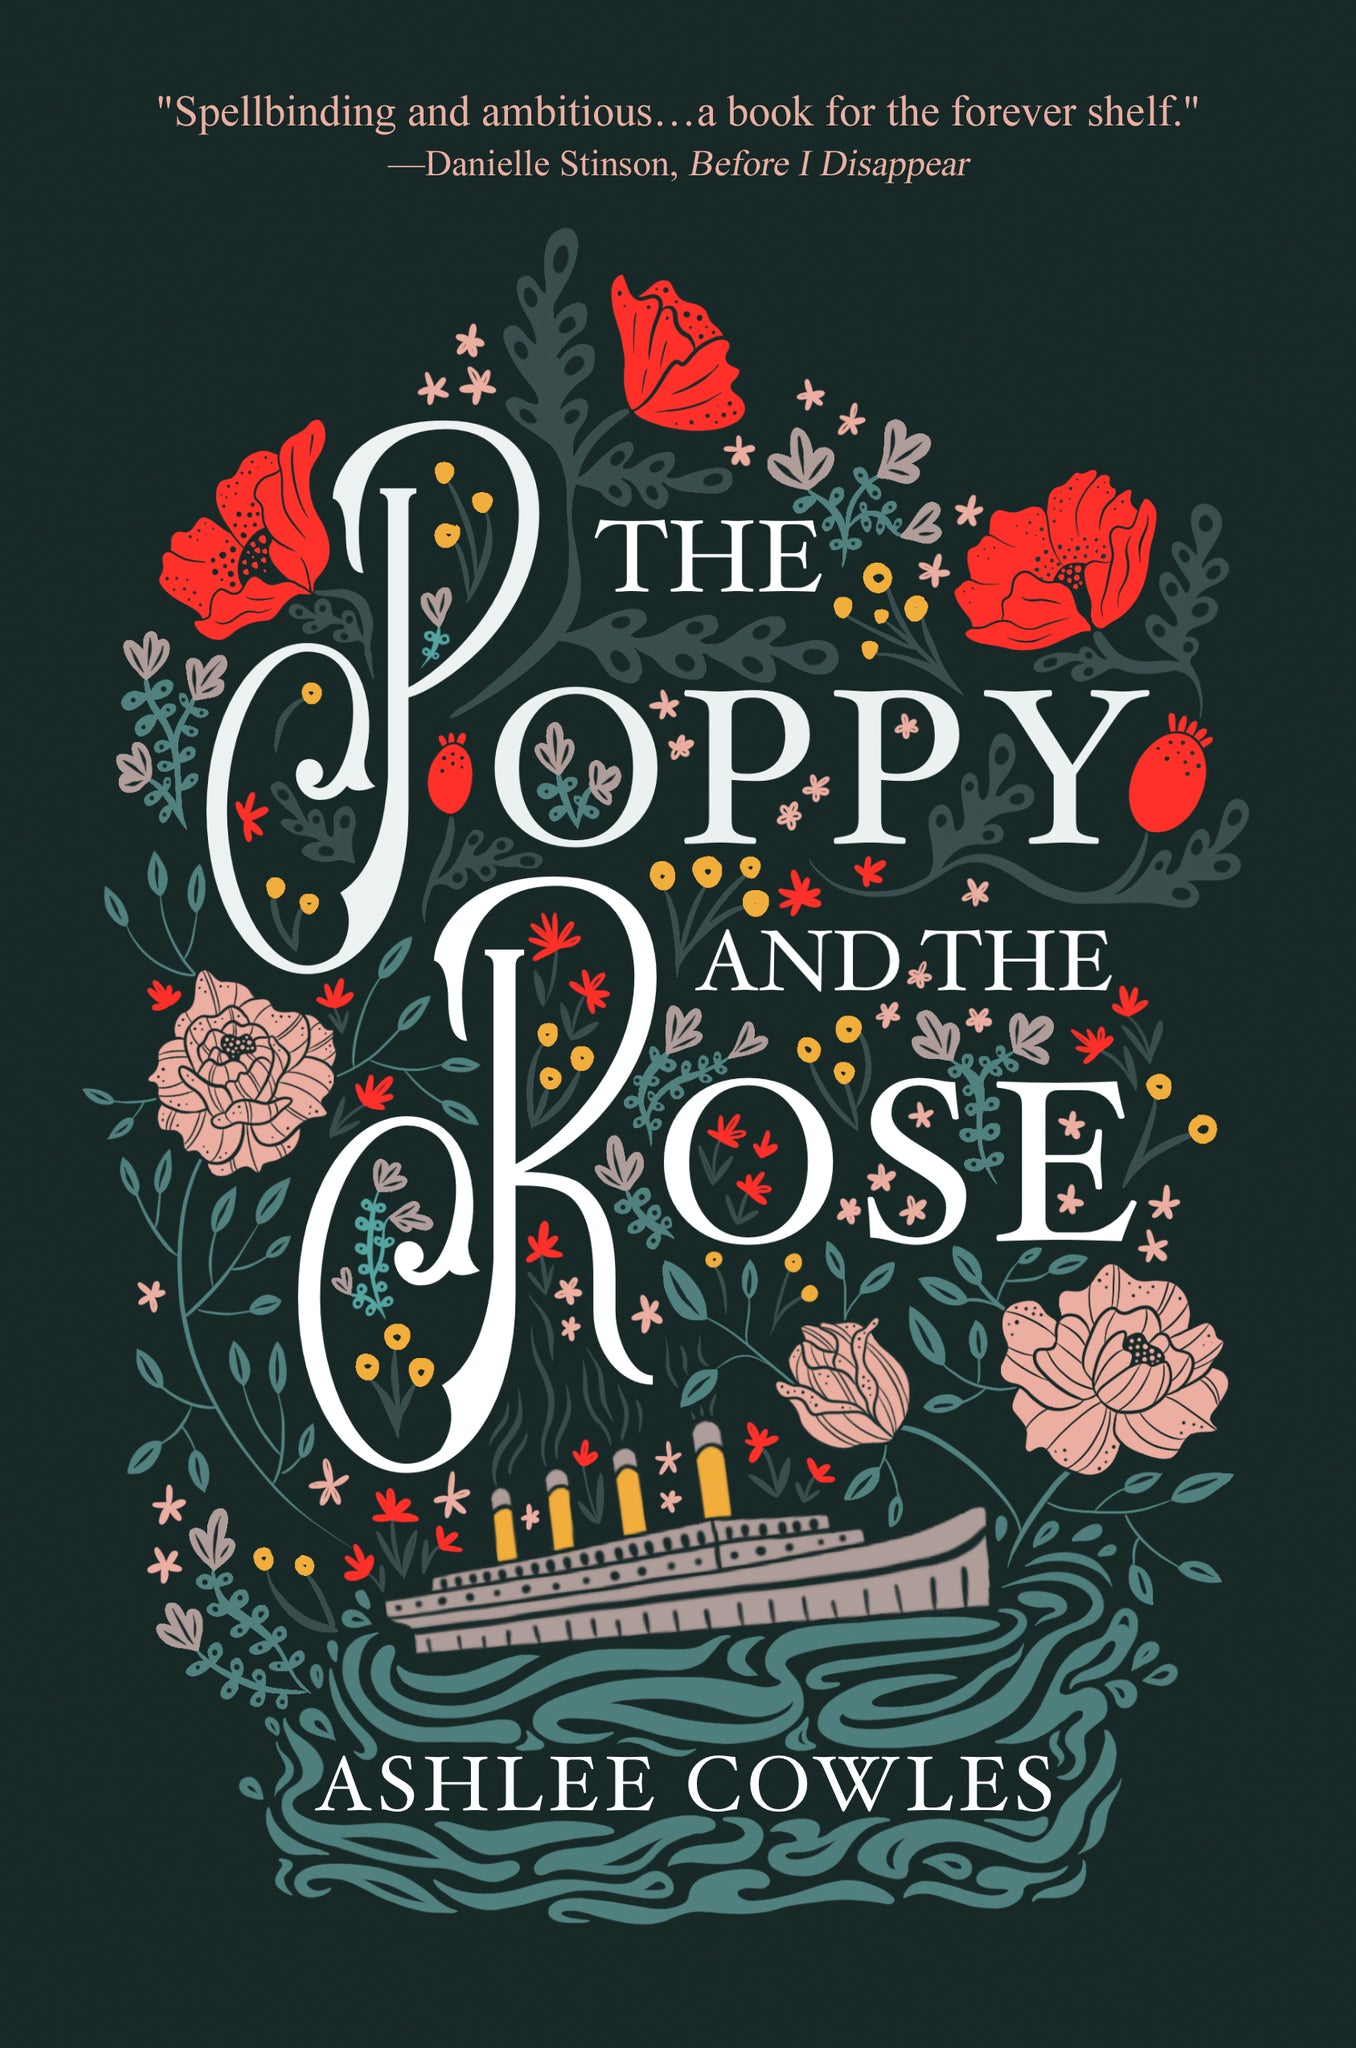 The Poppy and the Rose